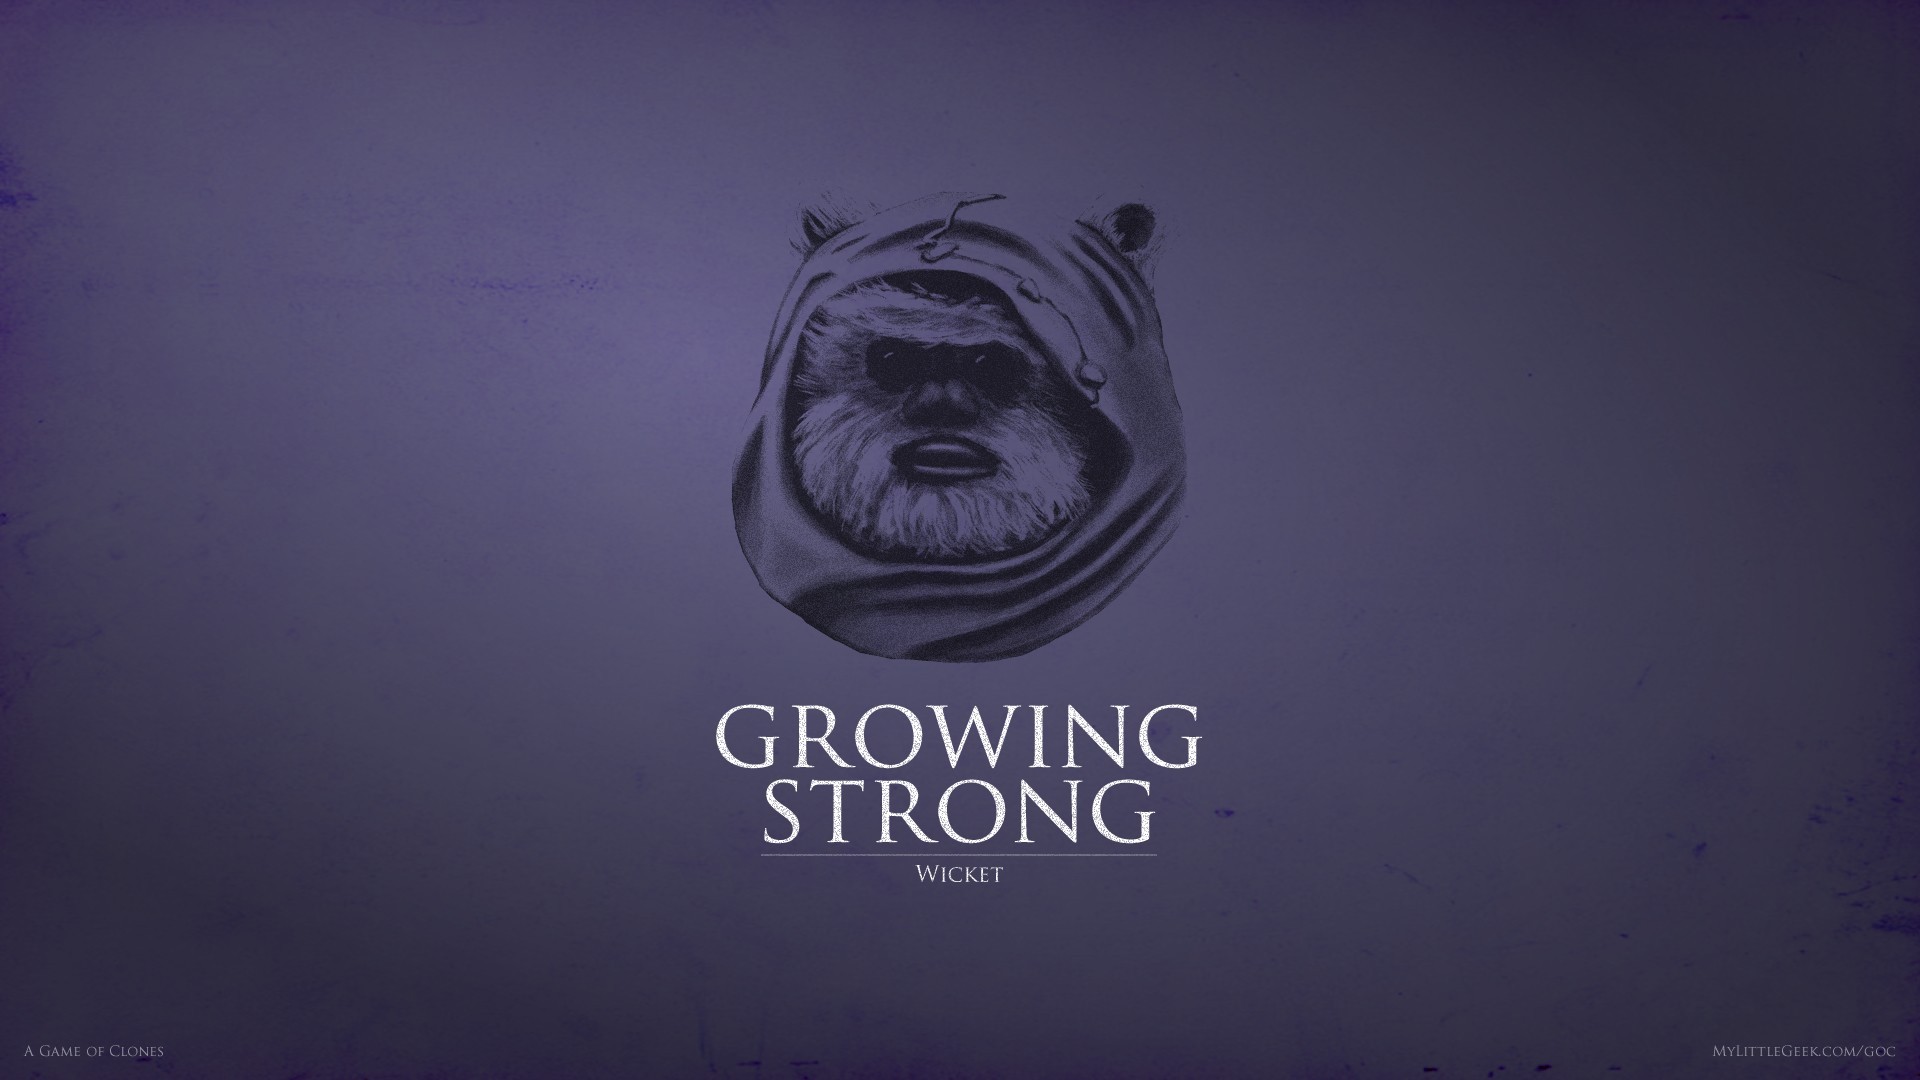 General 1920x1080 Star Wars Game of Thrones crossover House Tyrell Ewok Star Wars Heroes purple background simple background